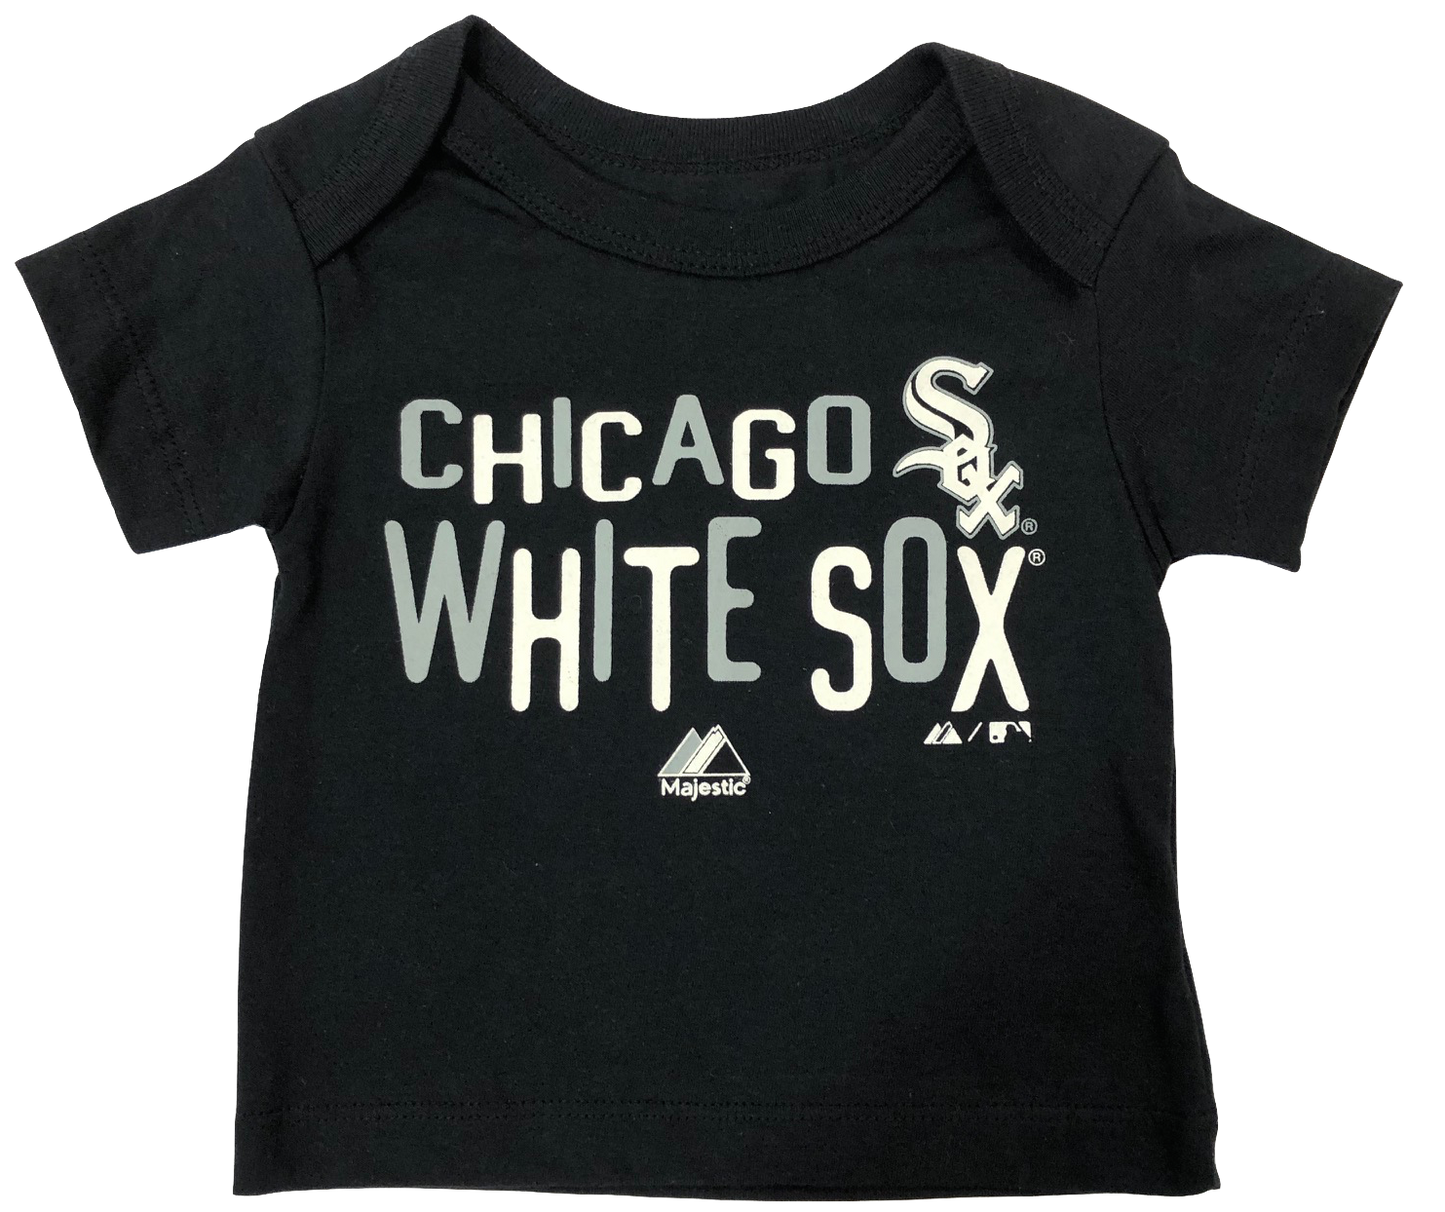 Chicago White Sox Lapped Shoulder Infant Tee